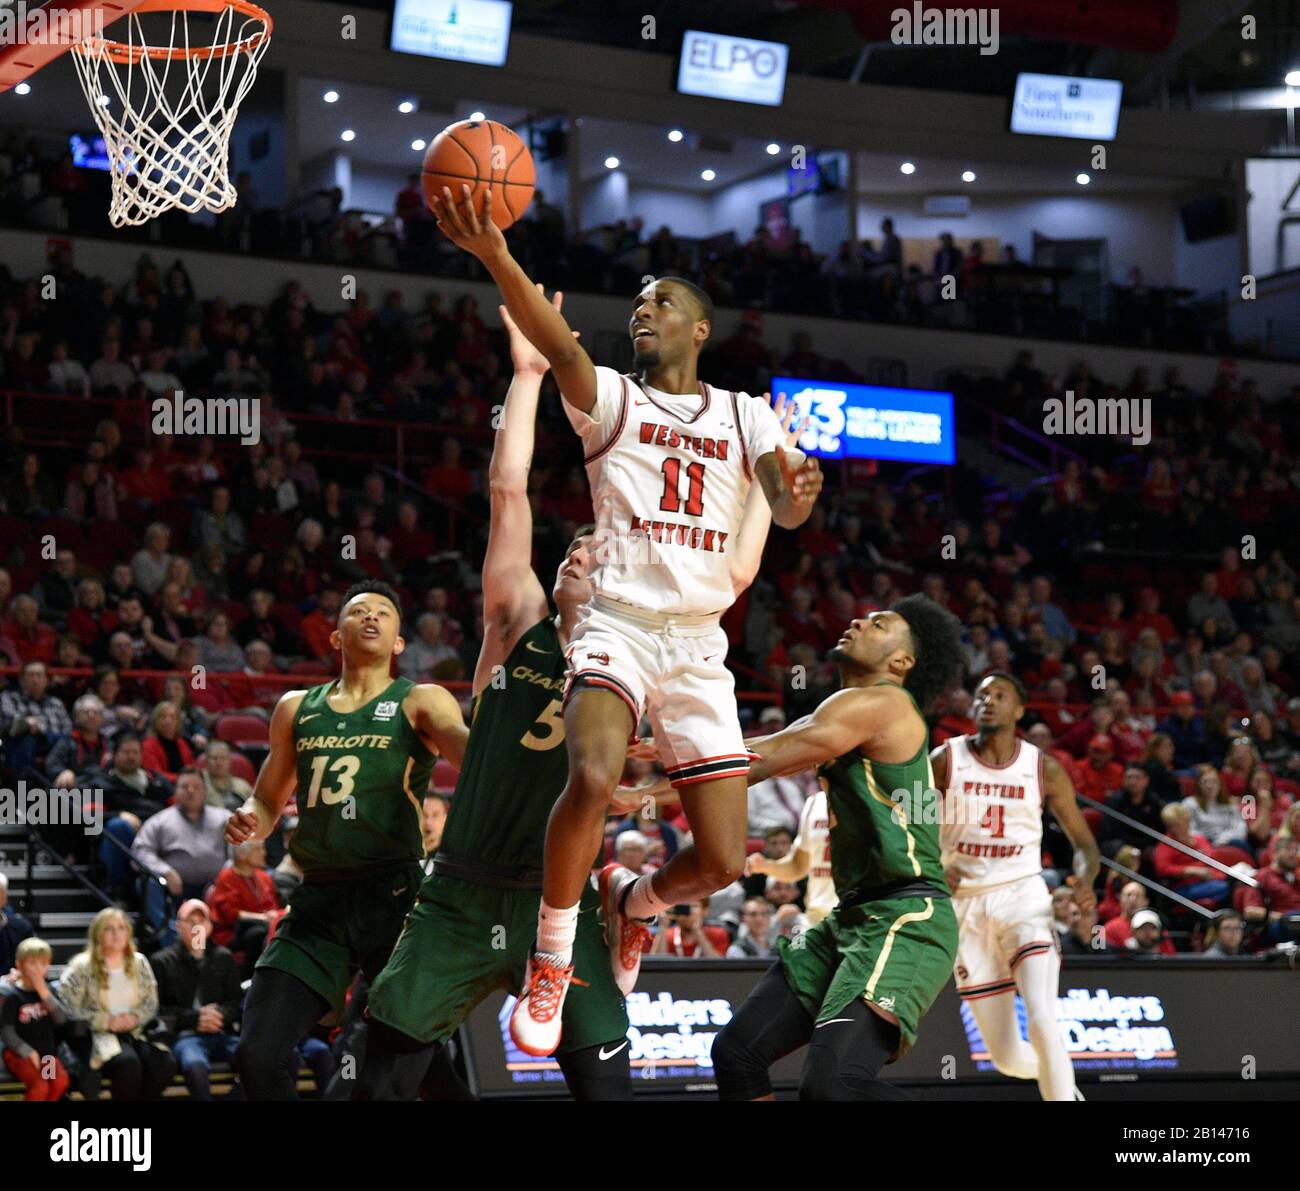 February 21, 2020: Western Kentucky Hilltoppers guard Taveion Hollingsworth (11) lays the ball in over Charlotte 49ers forward Milos Supica (5) during a NCAA basketball game between the Charlotte 49er's and the WKU Hilltoppers at E.A. Diddle Arena in Bowling Green, KY (Photo Credit: Steve Roberts.CSM) Stock Photo